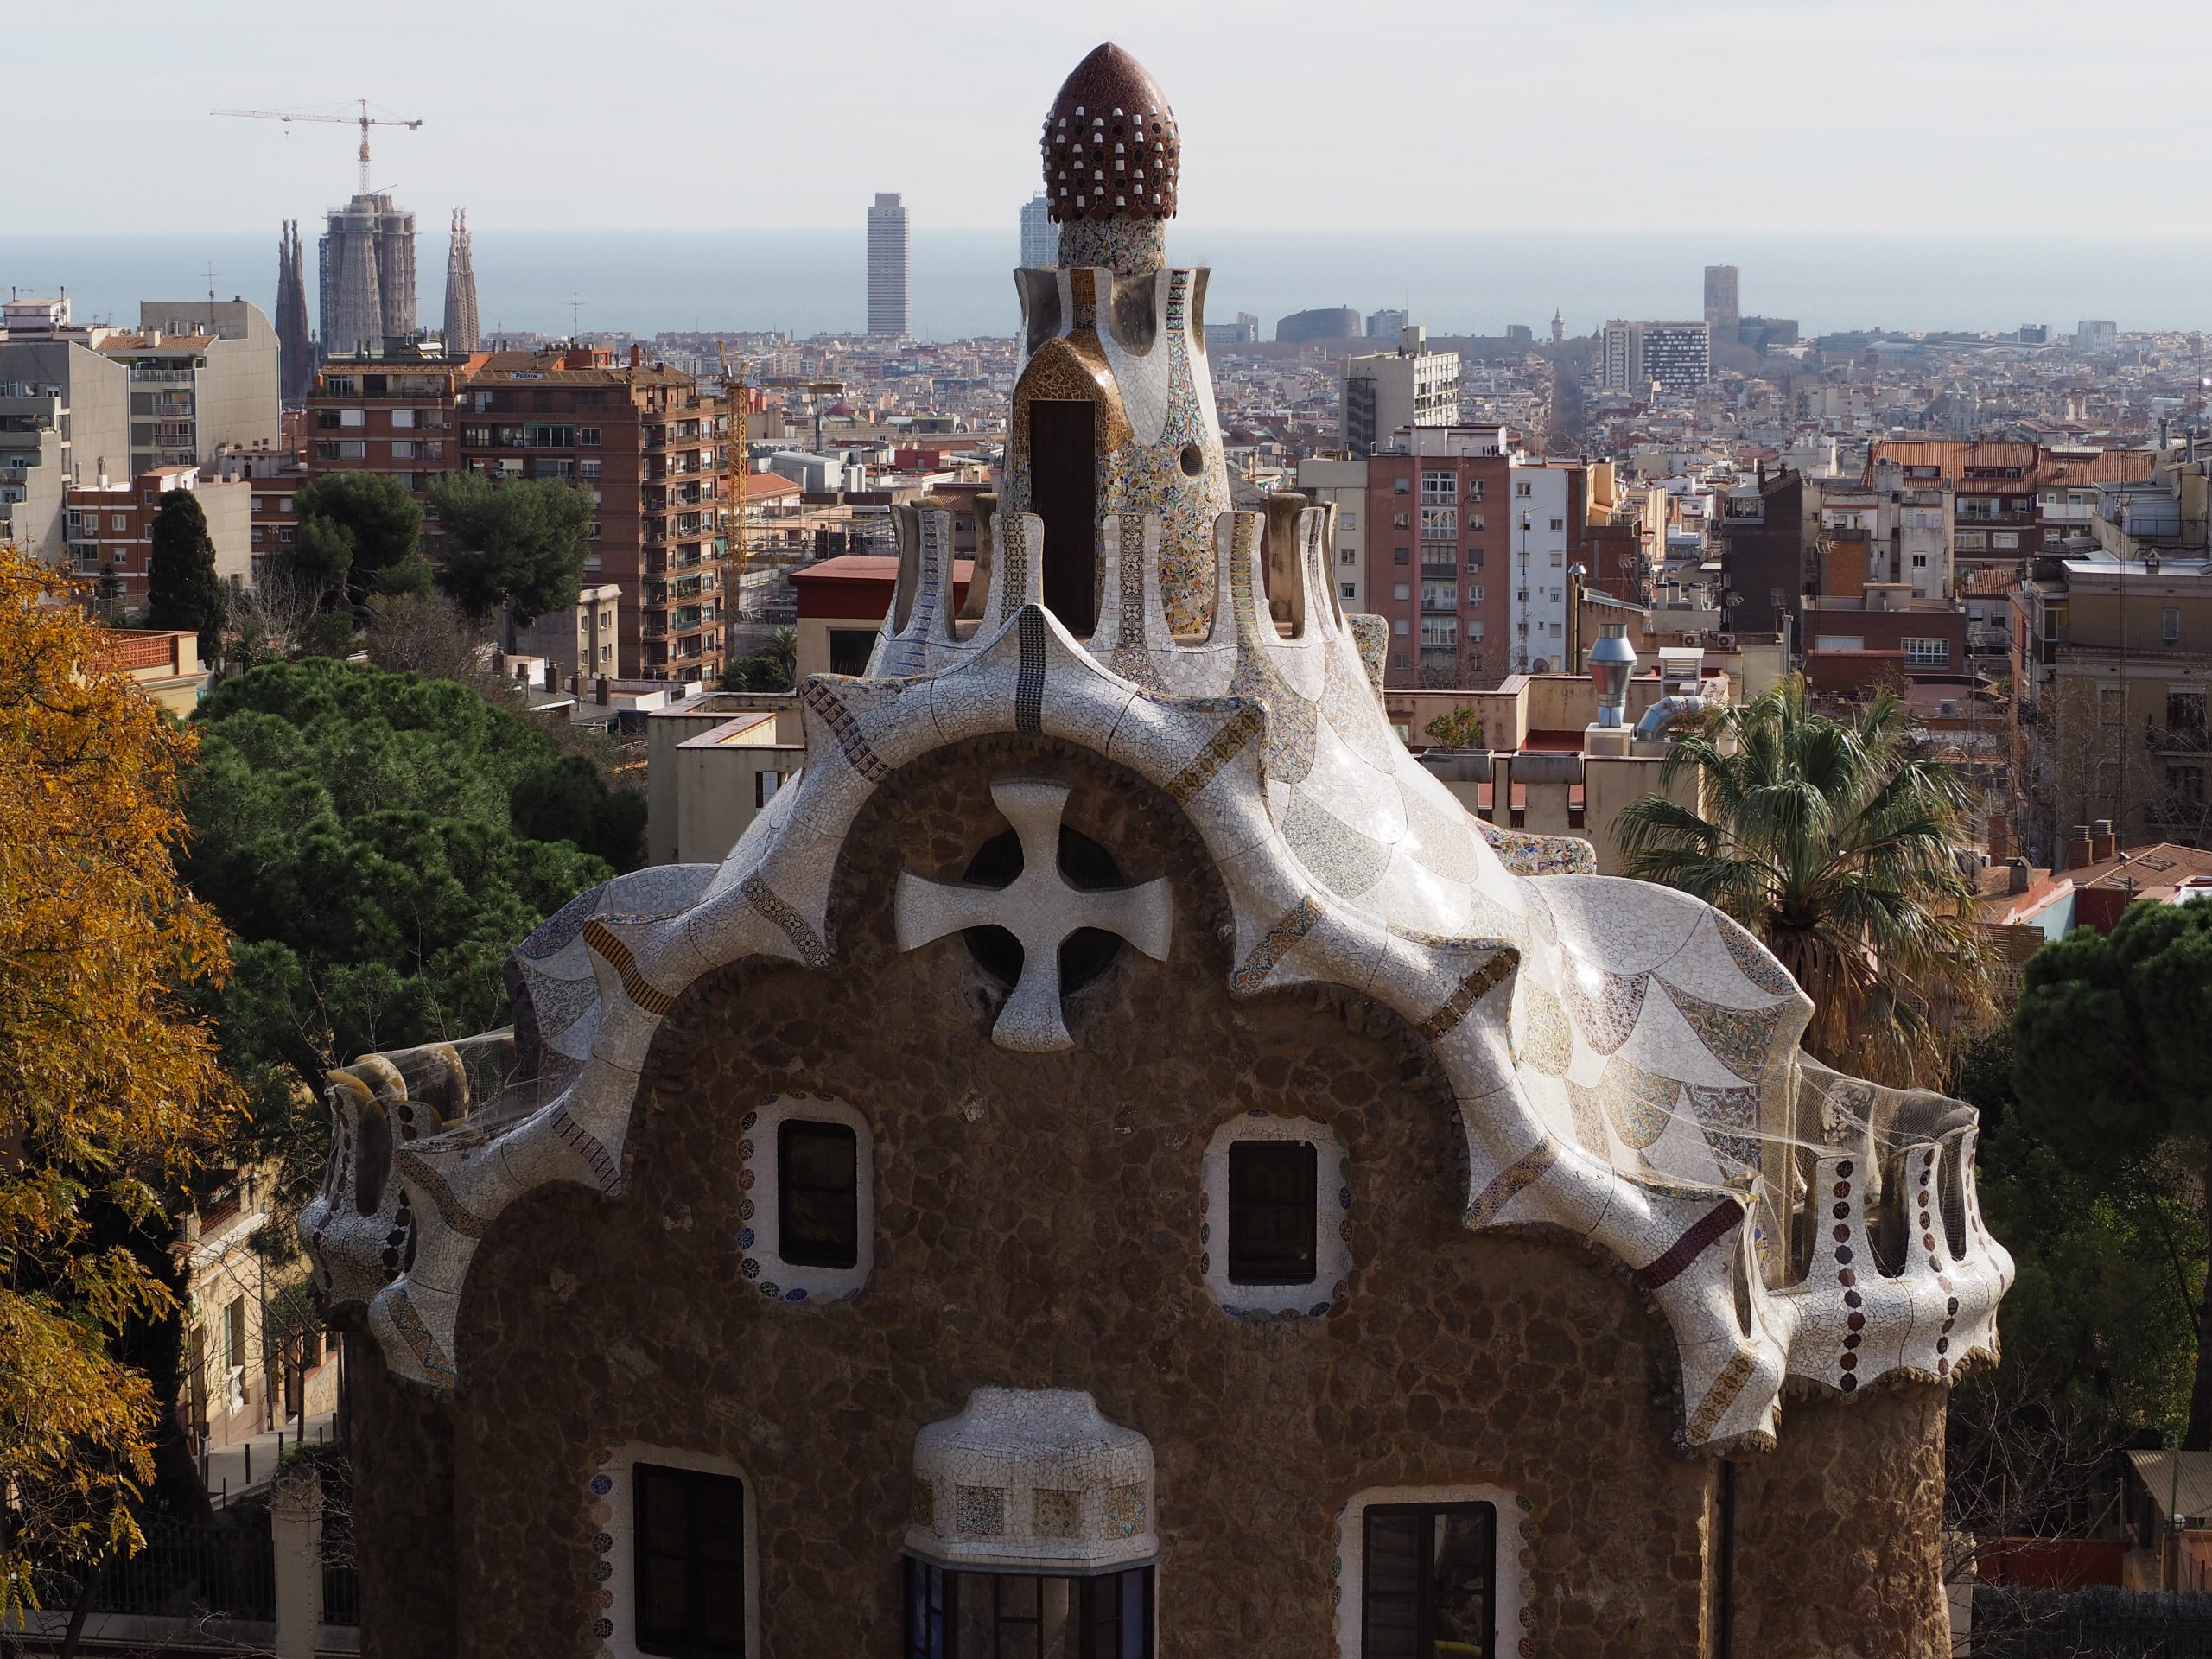 The Guard House by Gaudi at the Park Guell, and Barcelona skyline at the background